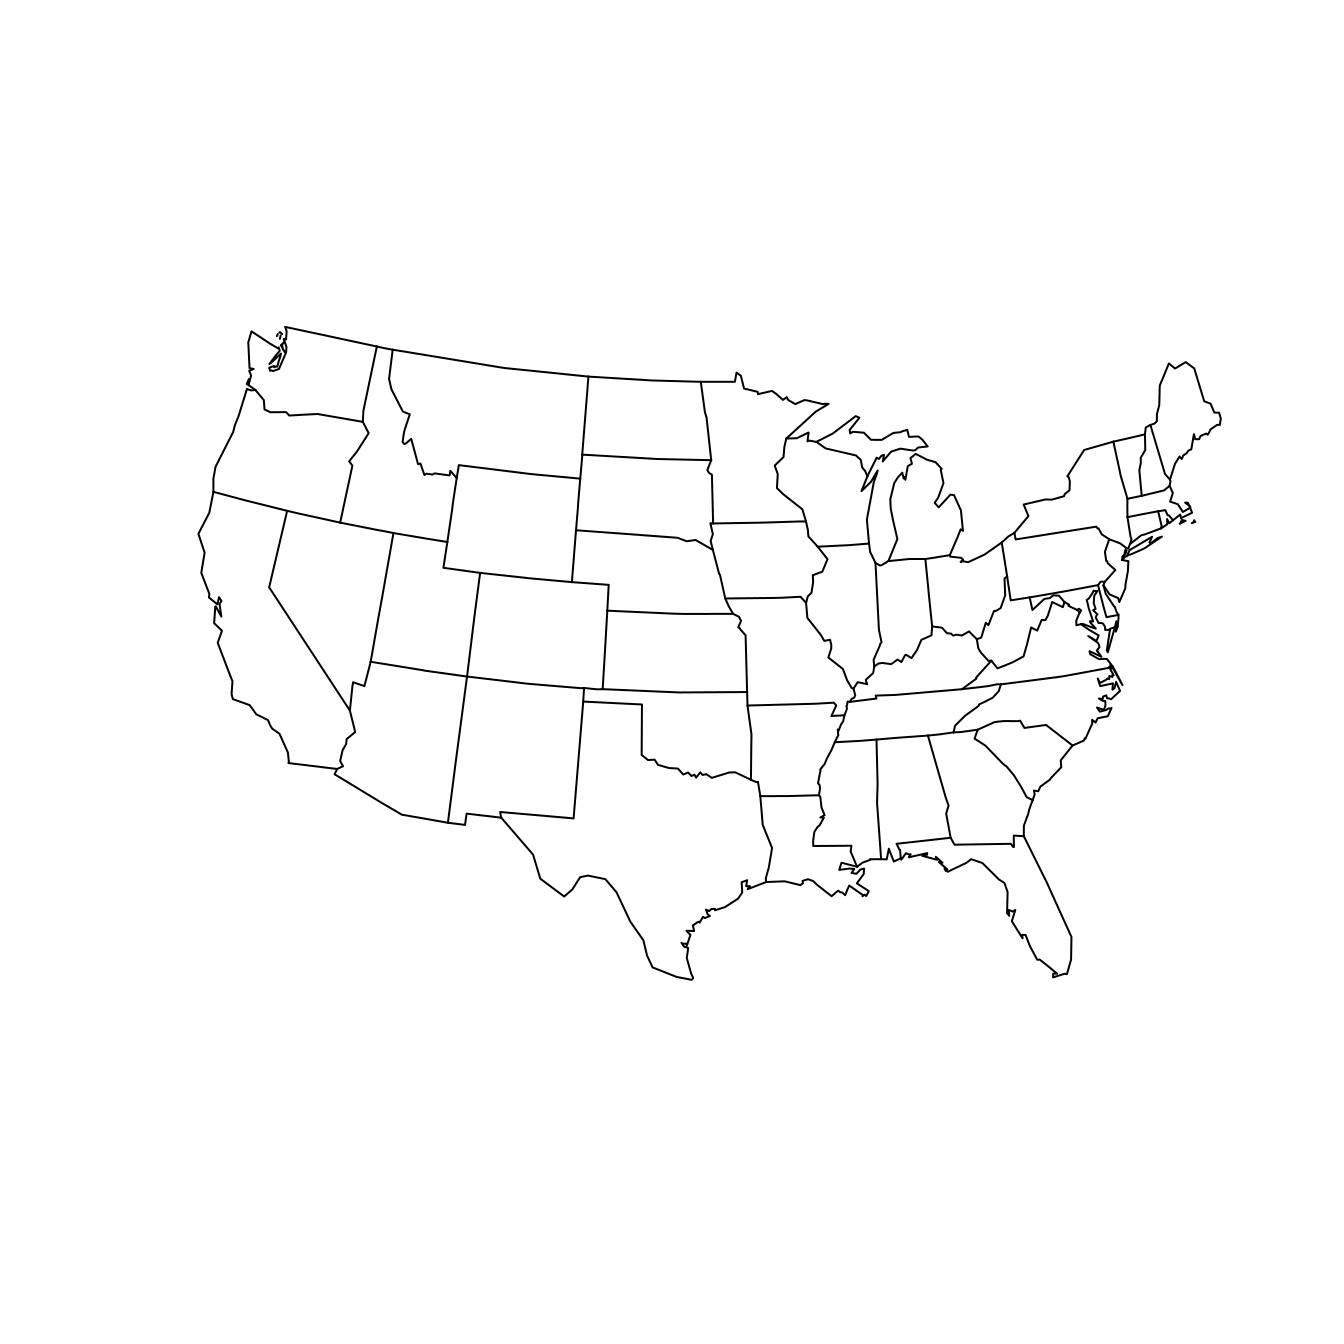 The contiguous United States according to the Lambert conformal conic (left) and Albers equal area (right) projections. We have specified that the scales are true on the 20th and 50th parallels.